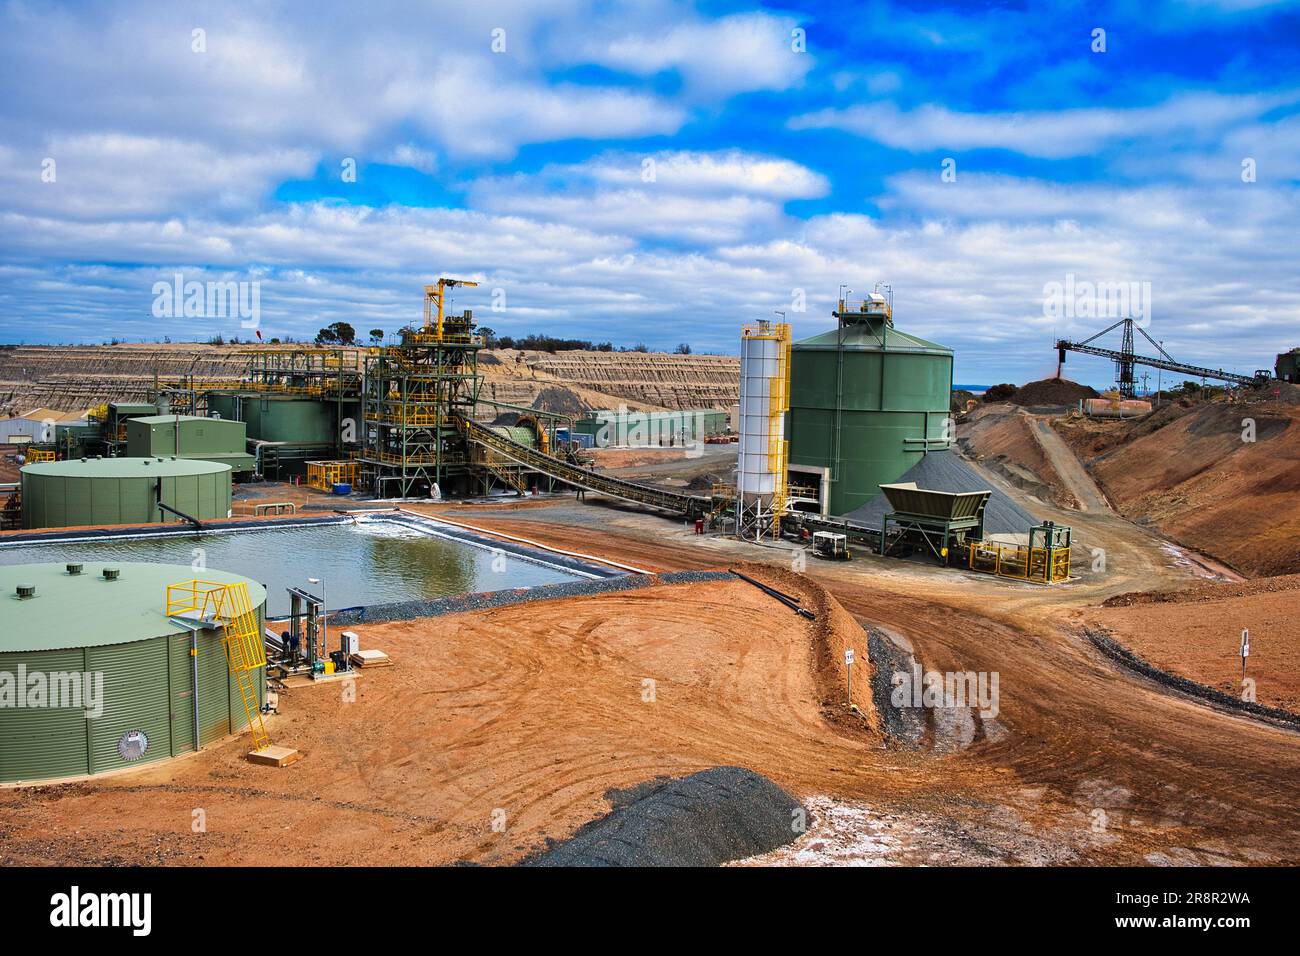 The Central Norseman gold mine in Norseman, Western Australia, with CIL tanks, tailings thickener pad, industrial buildings and heavy machinery. Stock Photo